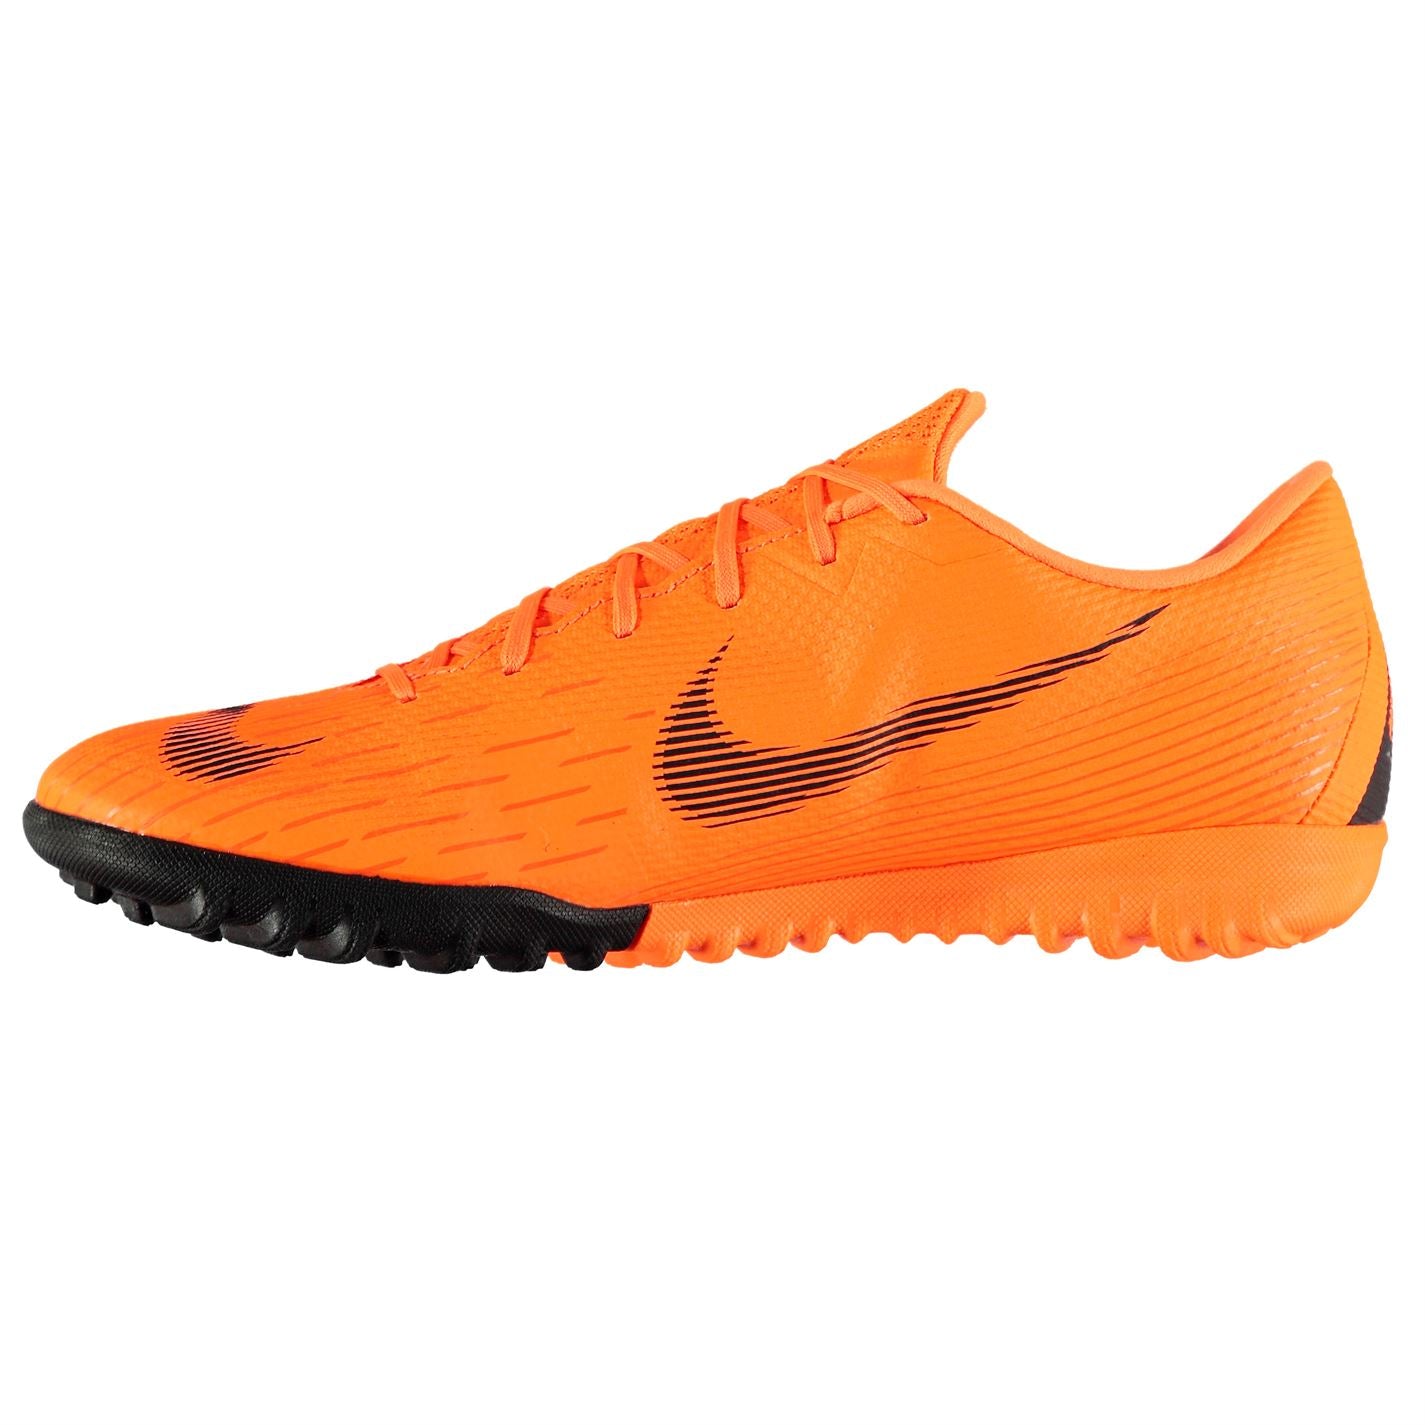 Academy Mg Vapor Xii Nike Chaussures Mercurial N0nkwO8PX